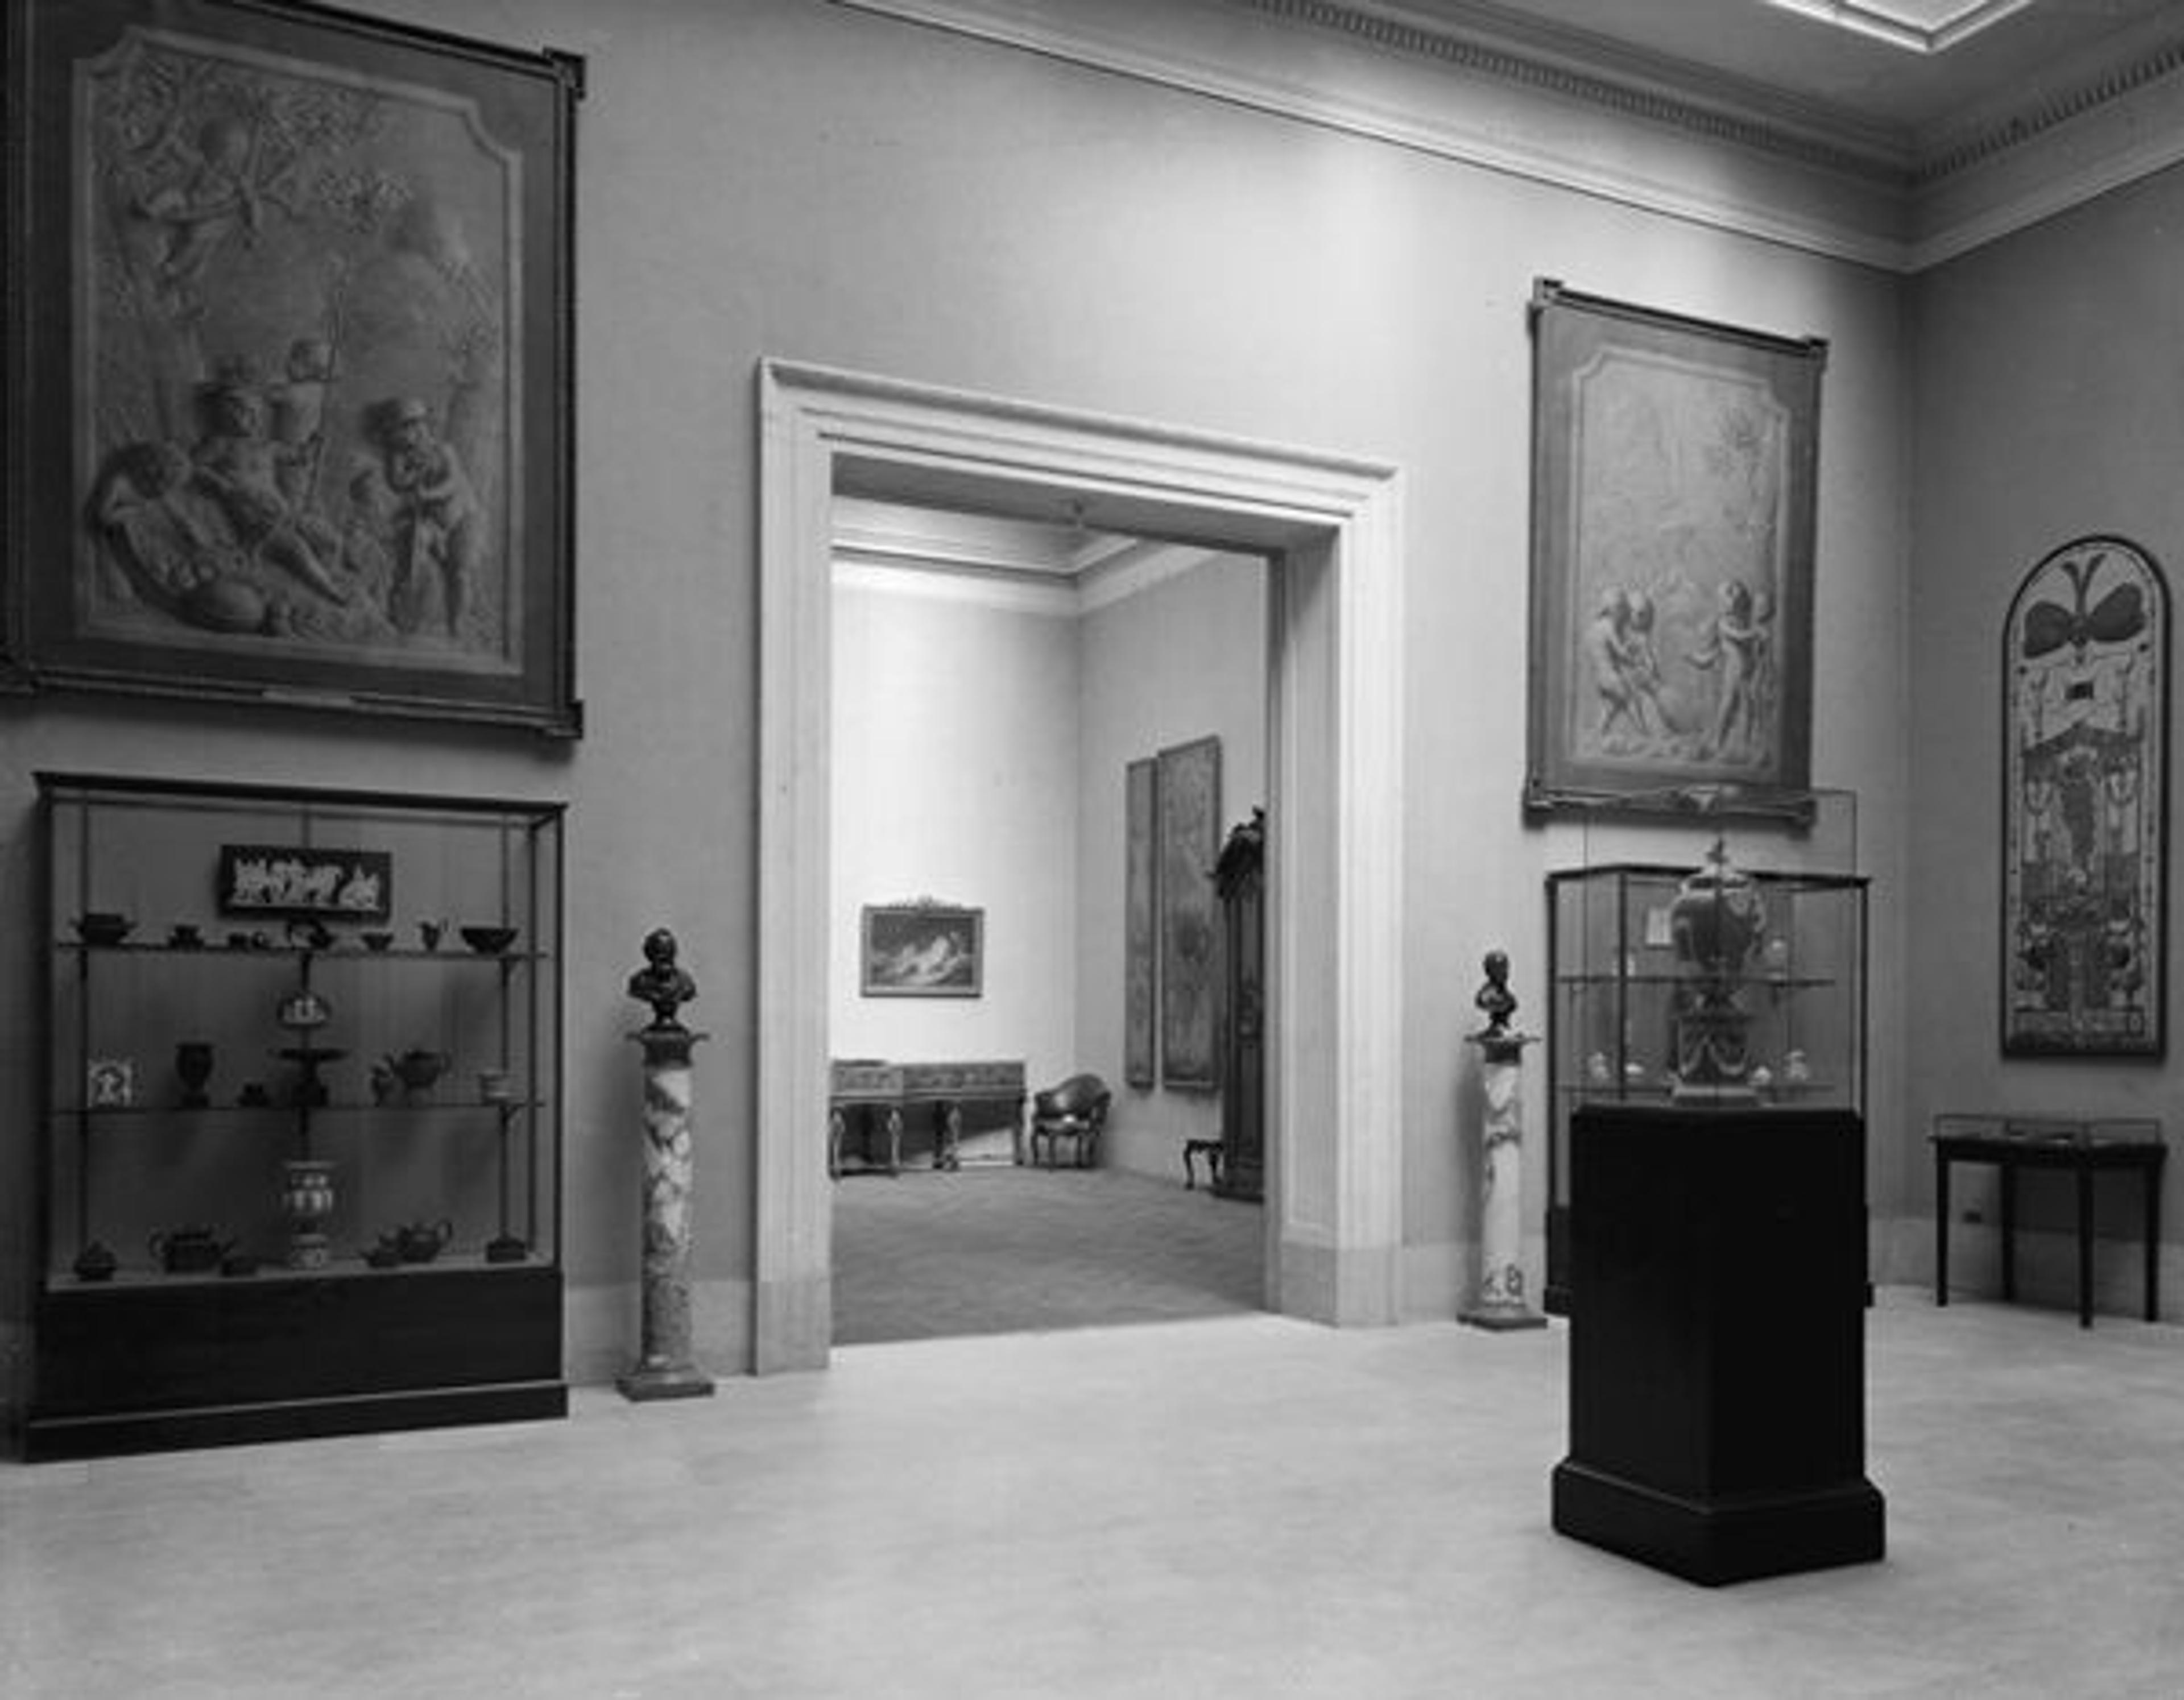 The Metropolitan Museum of Art, Wing K, second floor, room 22. Photographed on March 26, 1926